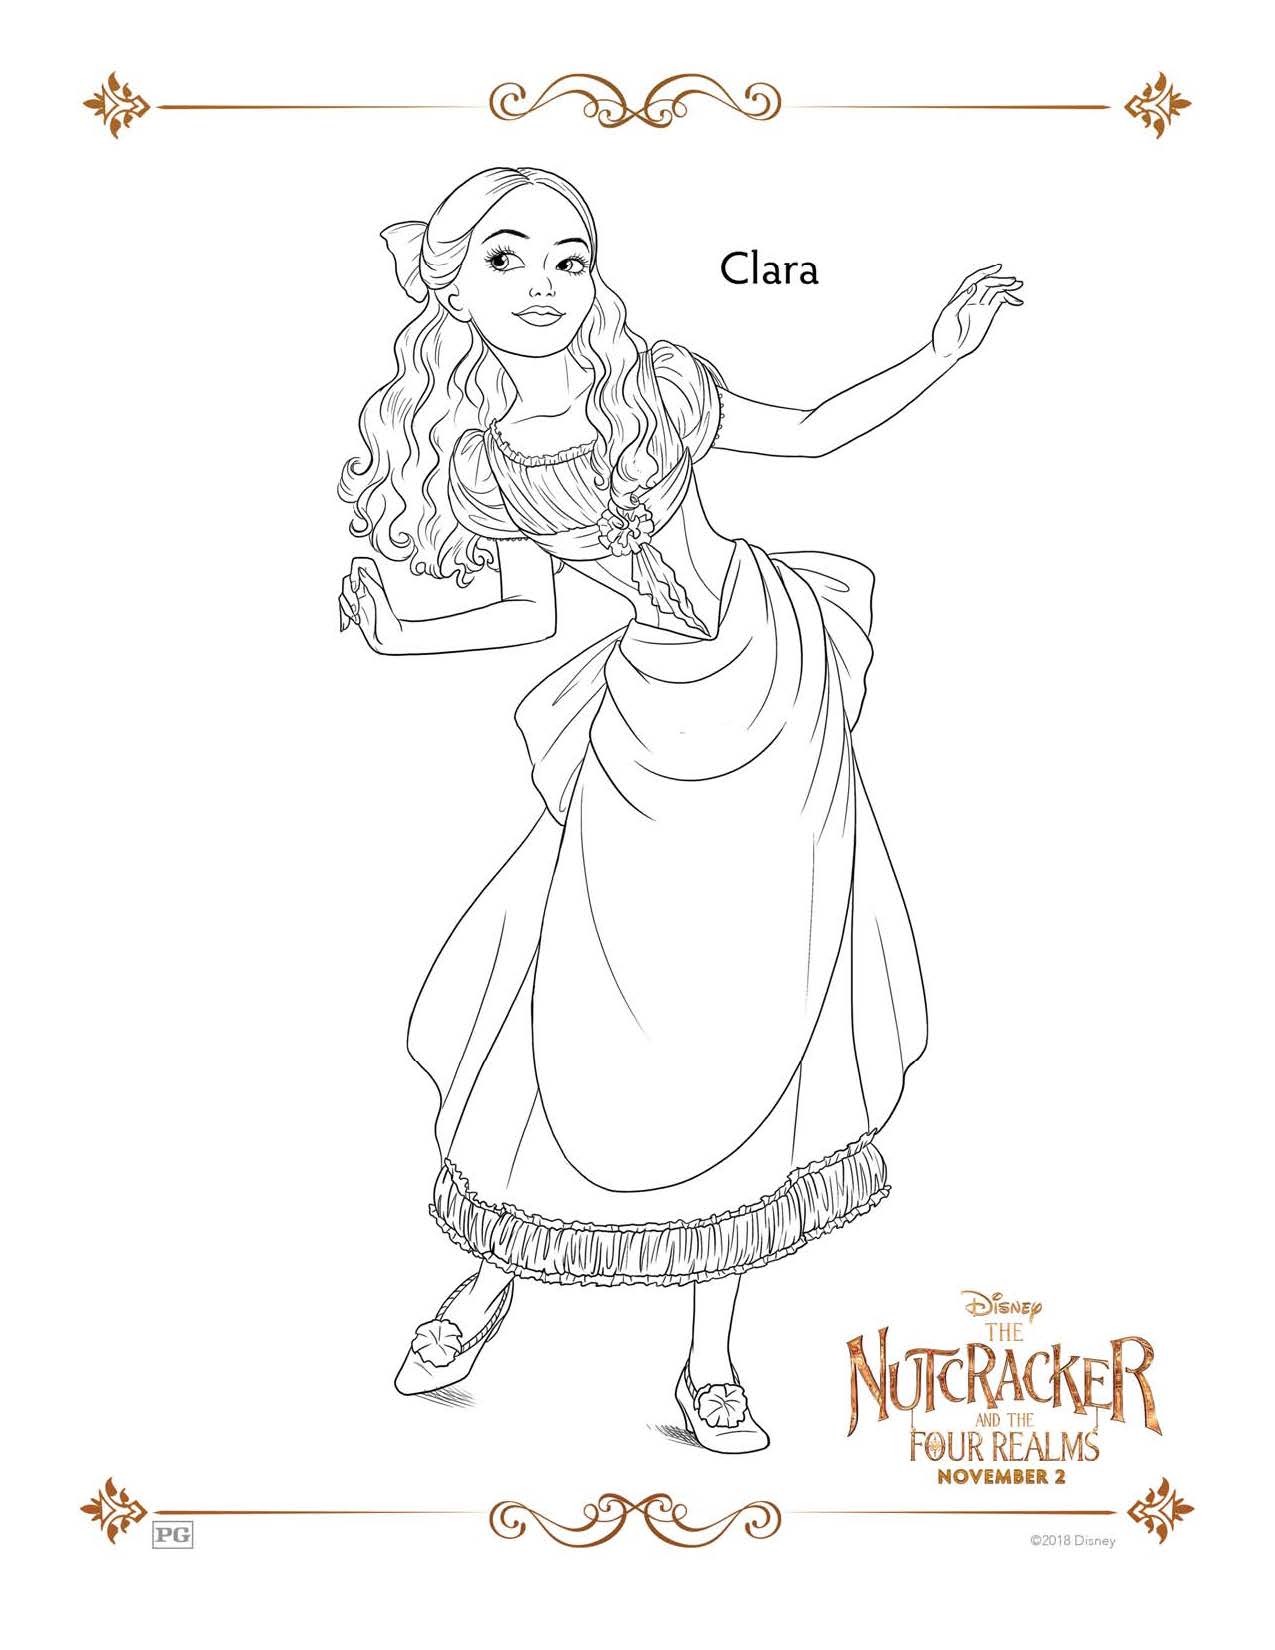 Clara - The Nutcracker and The Four Realms Coloring Pages and Activity Sheets